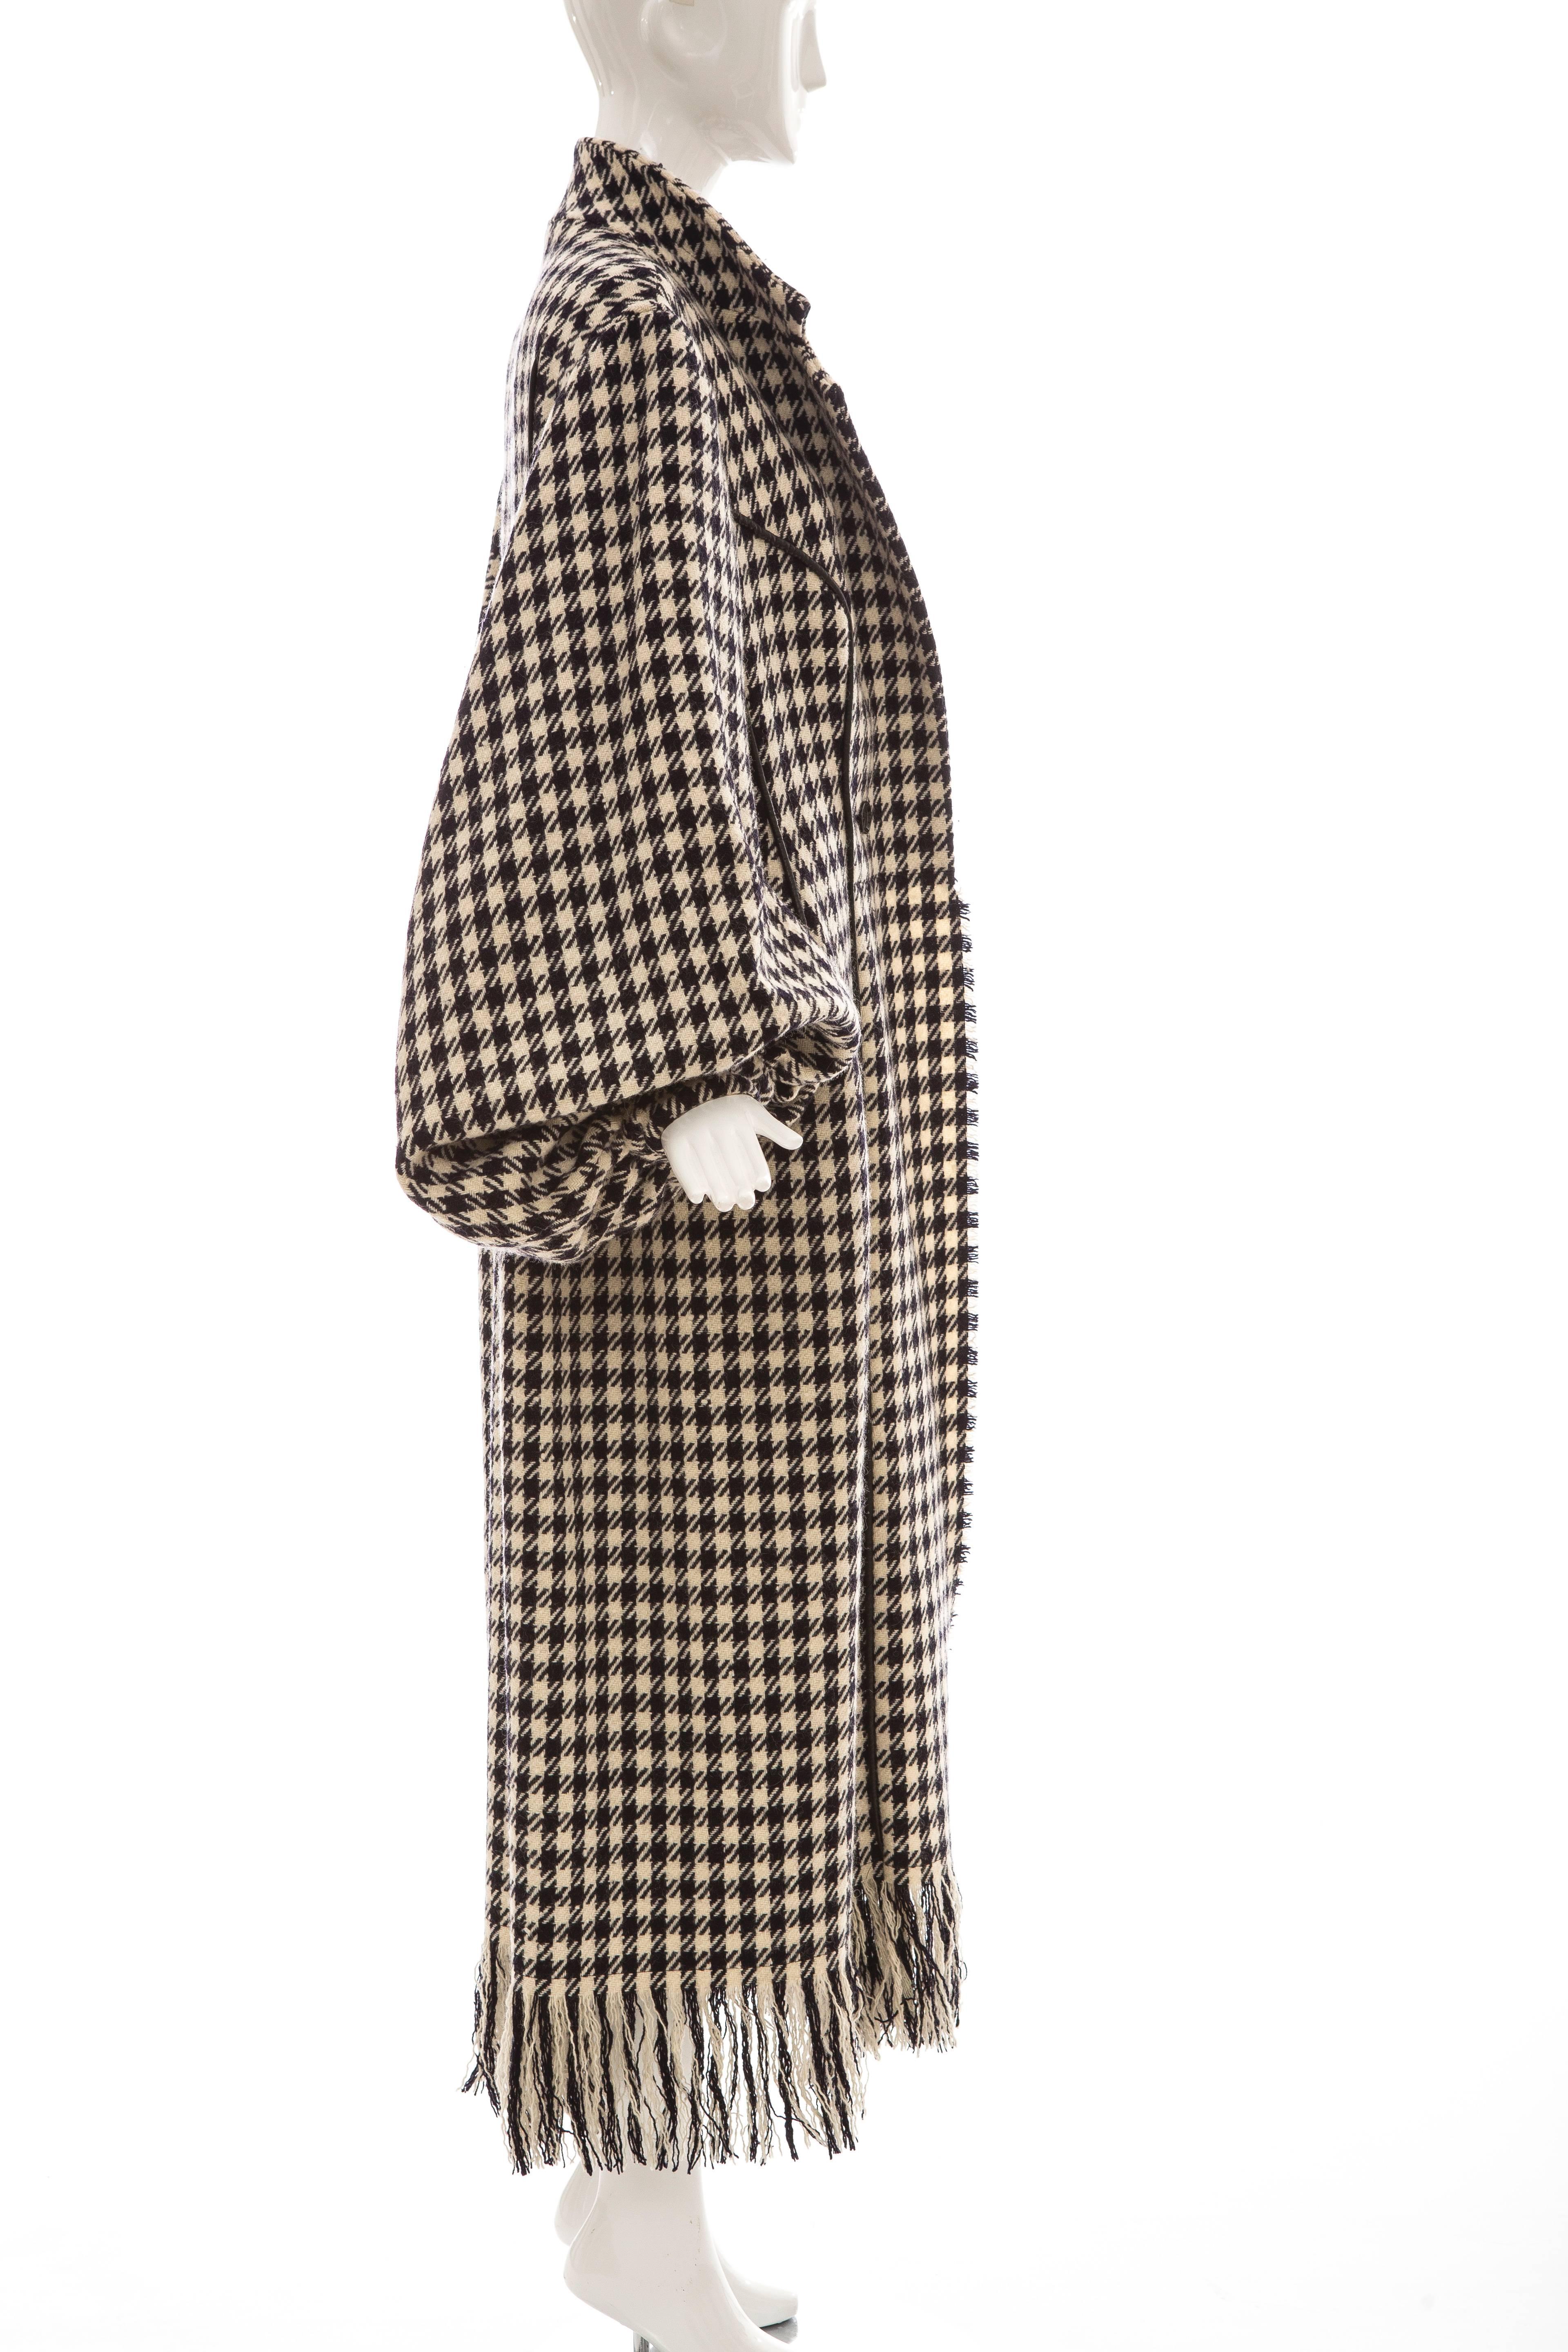 Yohji Yamamoto Black And White Wool Houndstooth Coat, Autumn - Winter 2003 In Excellent Condition In Cincinnati, OH